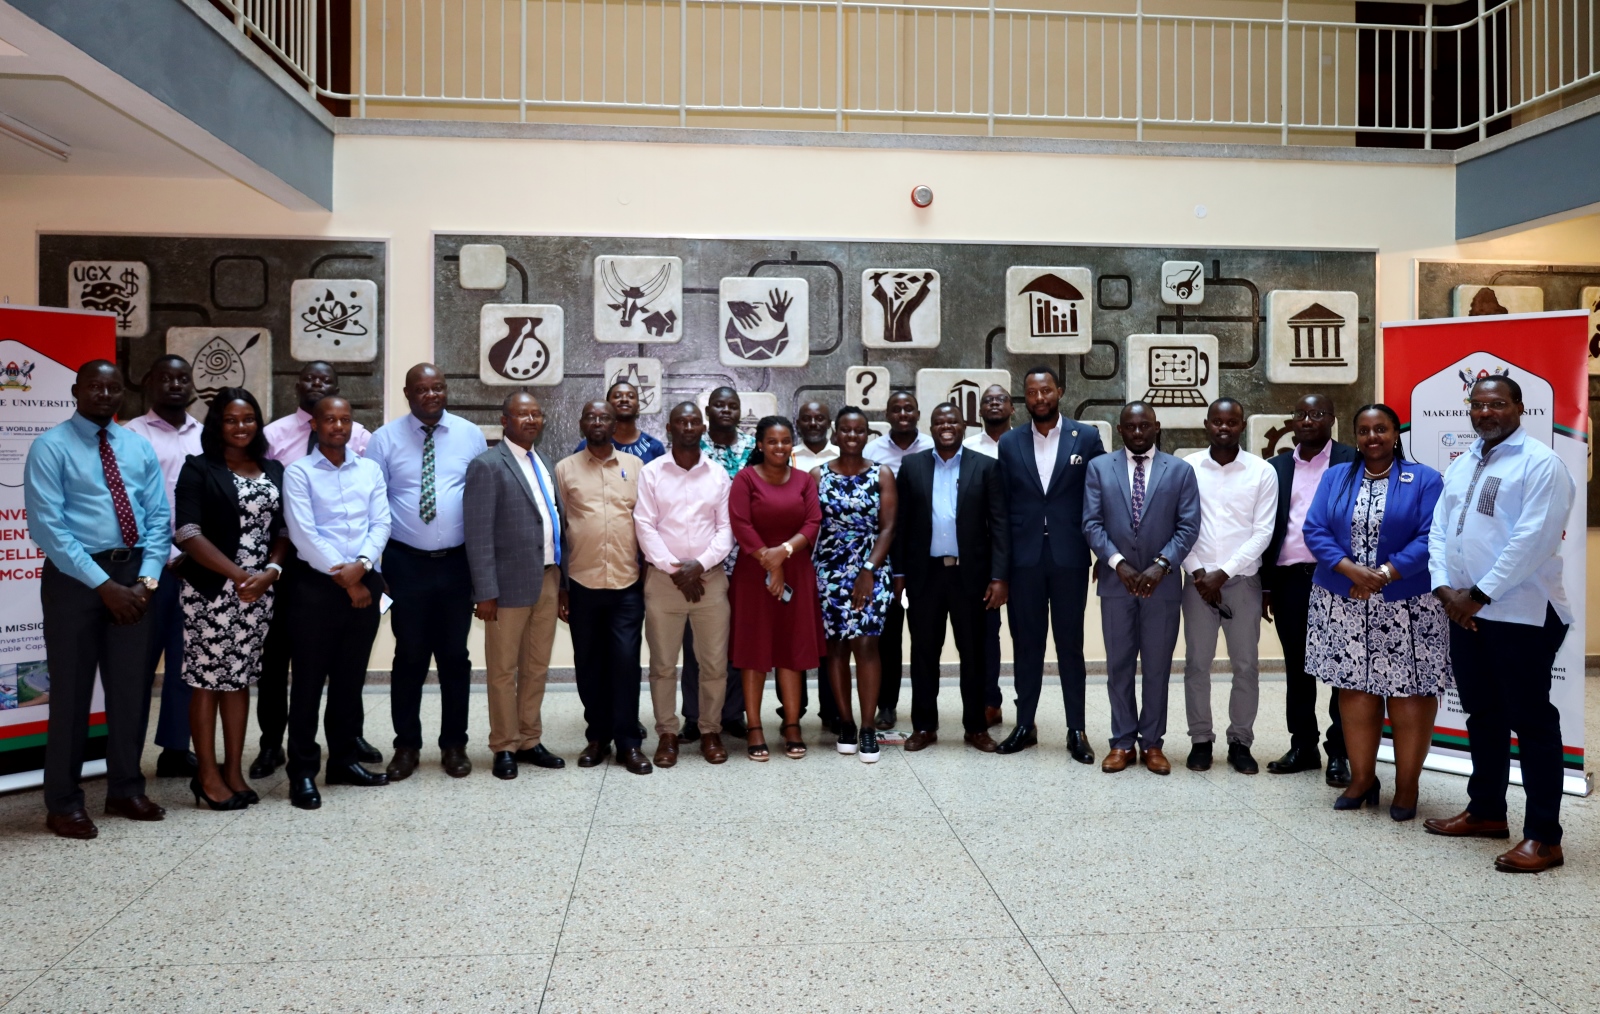 Trainees that attended the post-training evaluation workshop for the Public Investment Management (PIM) Centre of Excellence on 13th July 2023 pose for a group photo. Yusuf Lule Central Teaching Facility, Makerere University, Kampala Uganda. East Africa.